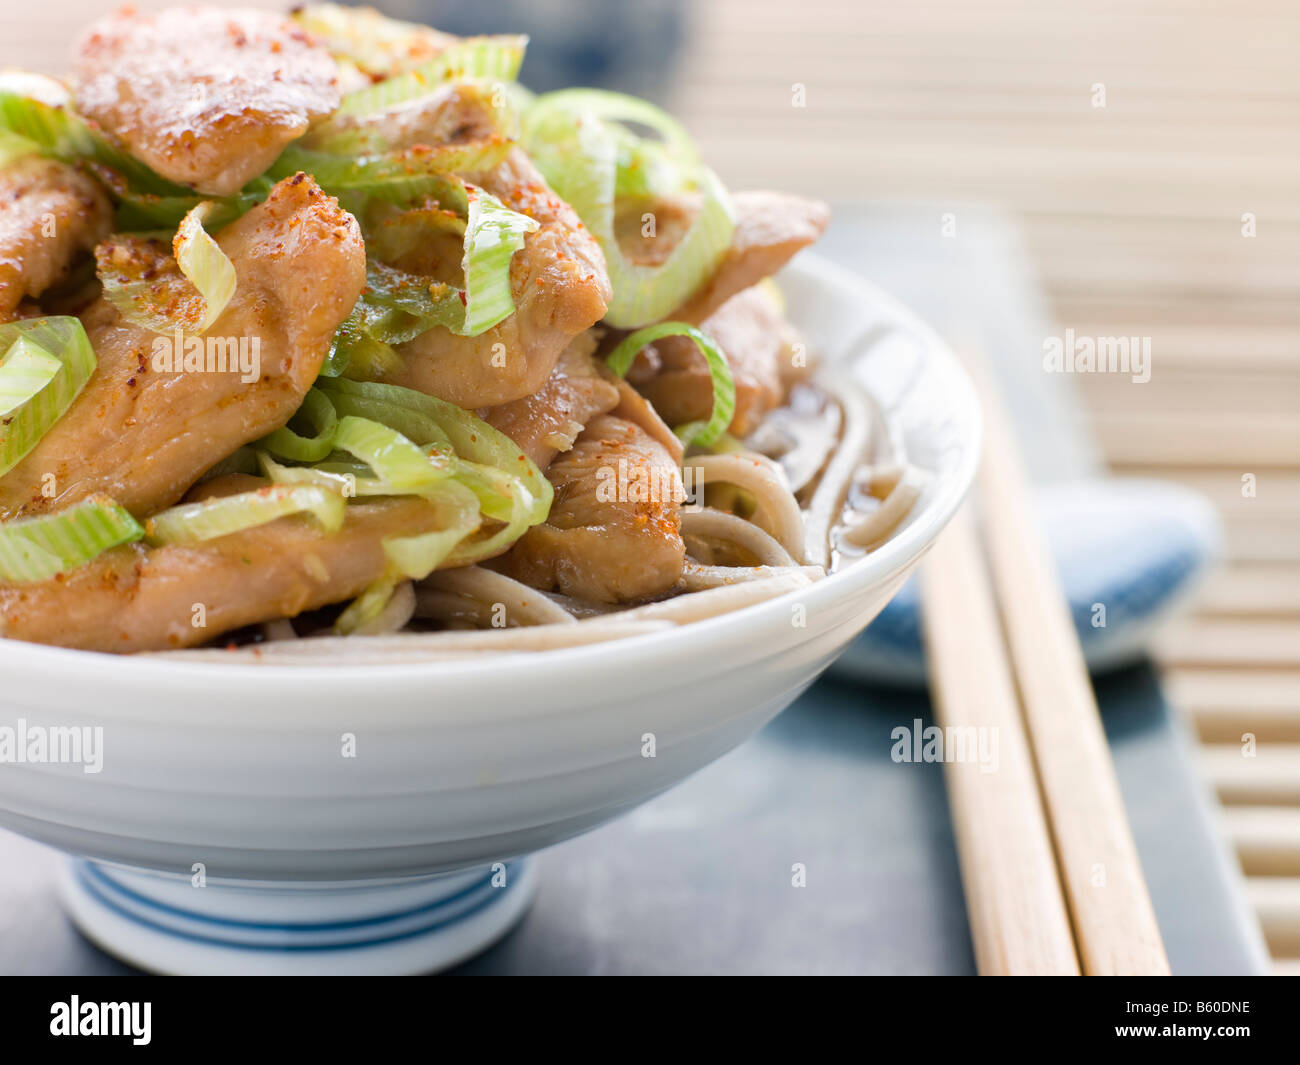 Bowl of Chicken and LeekSoba Noodles in Broth Stock Photo